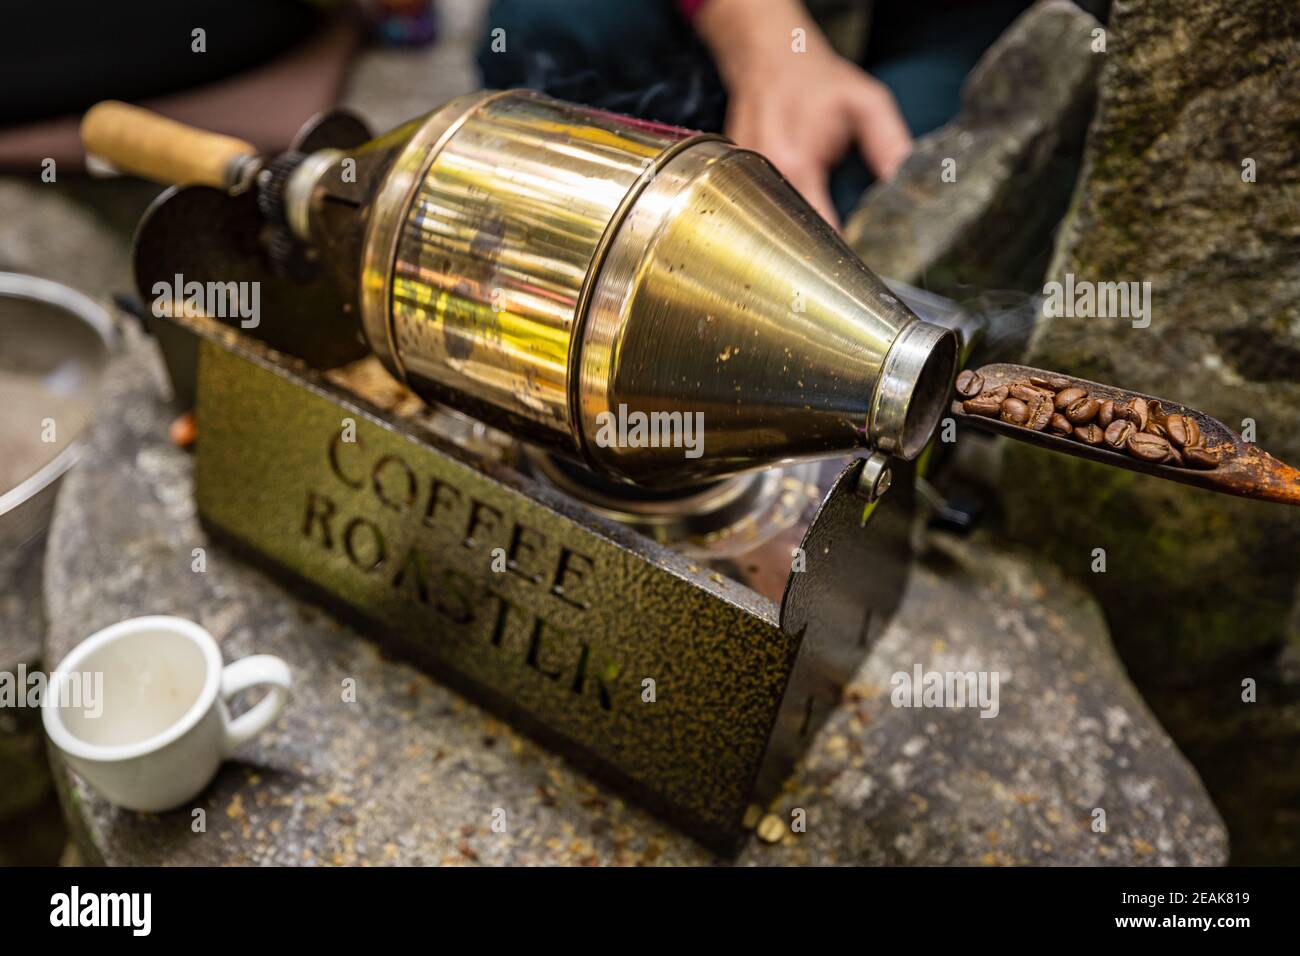 Coffee roasting with a small roaster at home Stock Photo